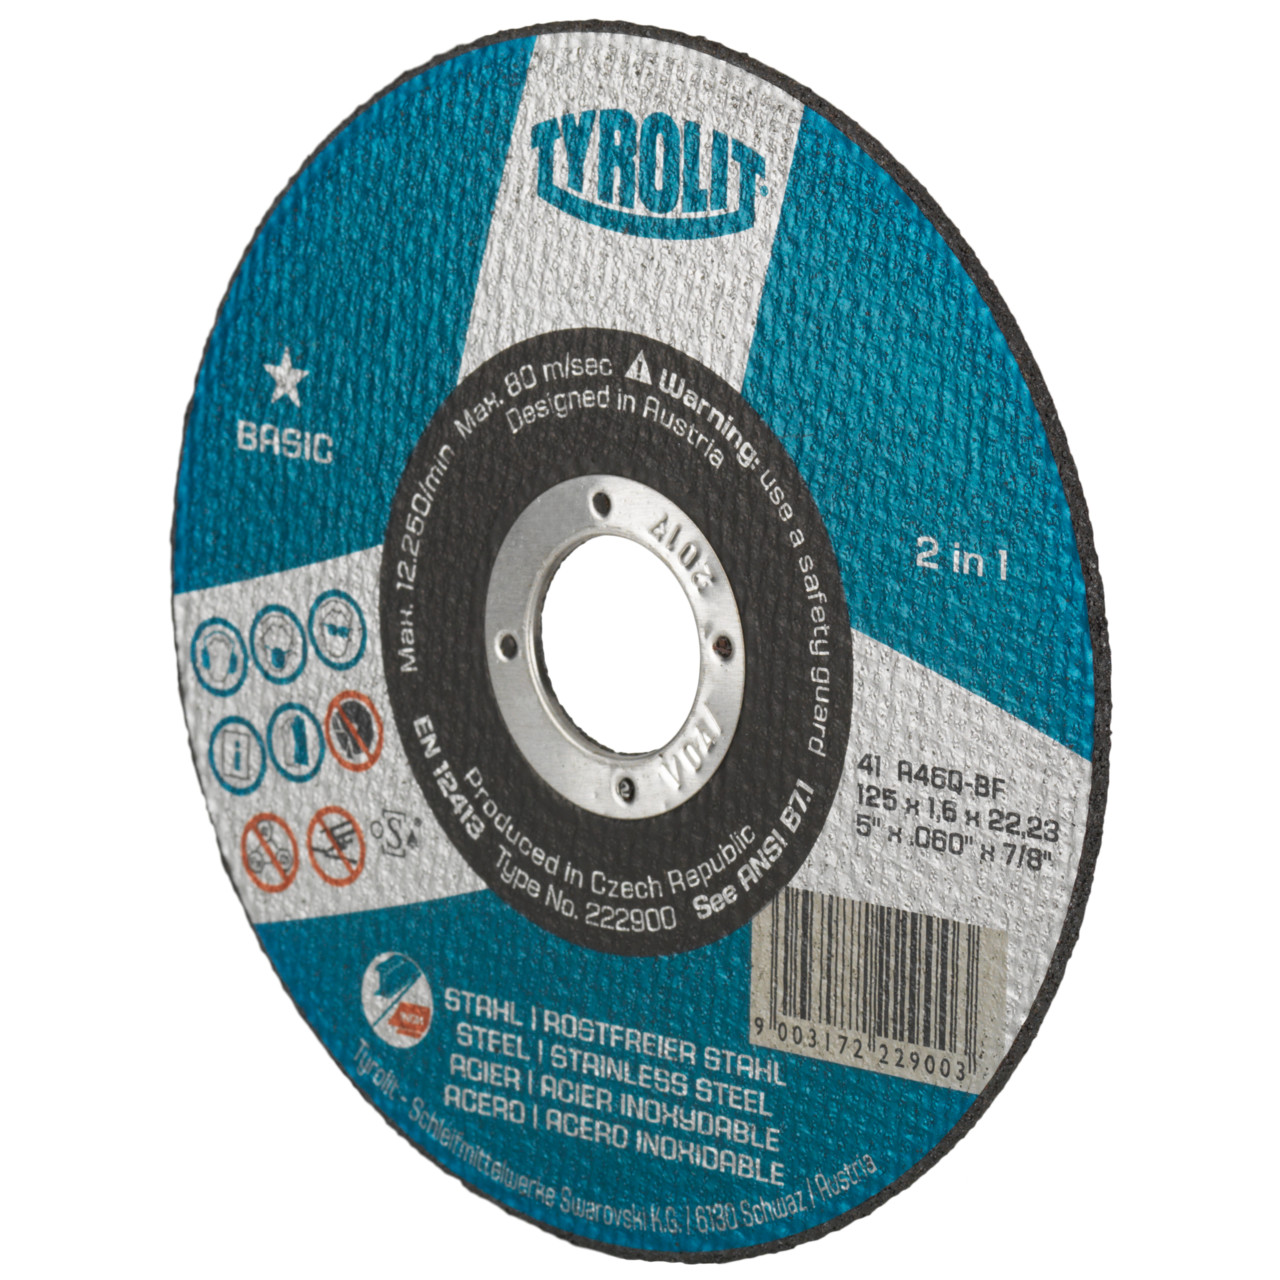 Tyrolit Cutting discs DxDxH 125x2.5x22.23 2in1 for steel and stainless steel, shape: 41 - straight version, Art. 222998